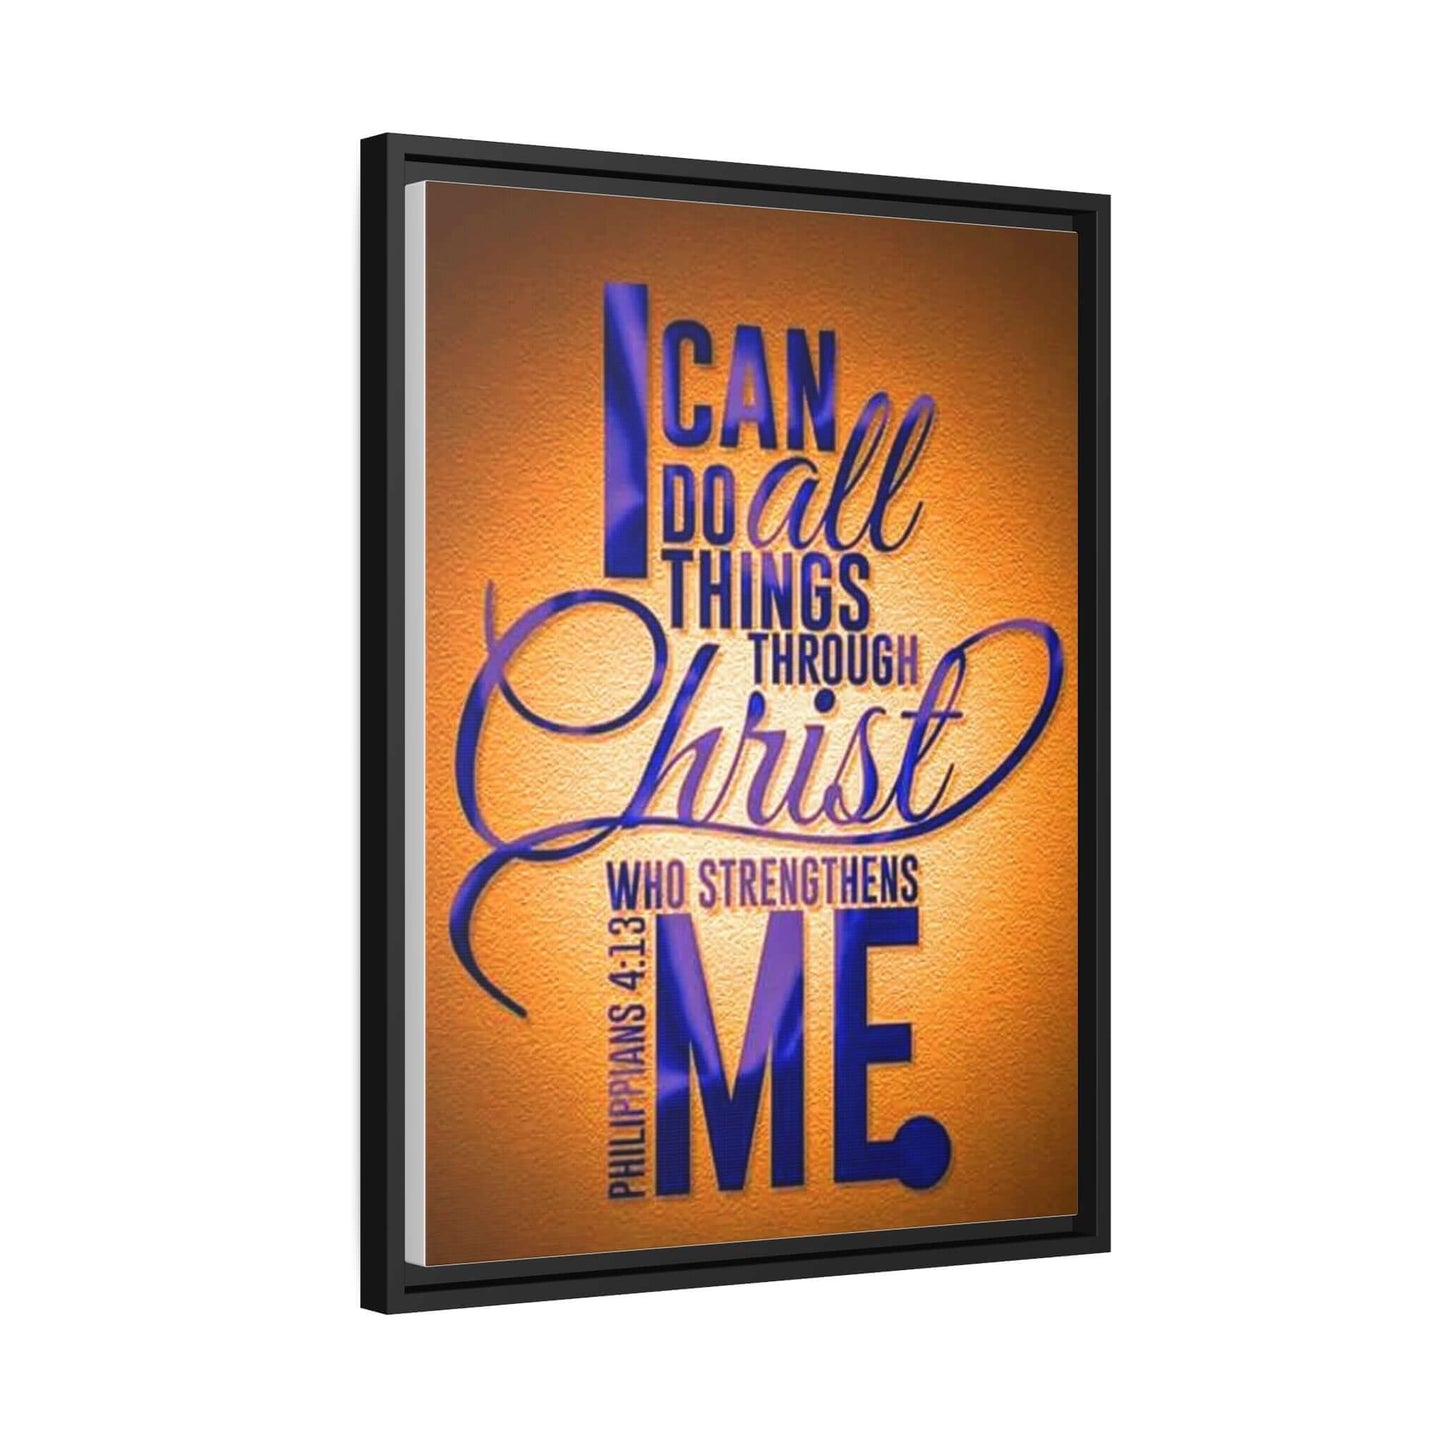 Elegant Framed Canvas Print with Inspirational Bible Verse | Art & Wall Decor,Canvas,Decor,Eco-friendly,Framed,Hanging Hardware,Home & Living,Summer Picks,Sustainable